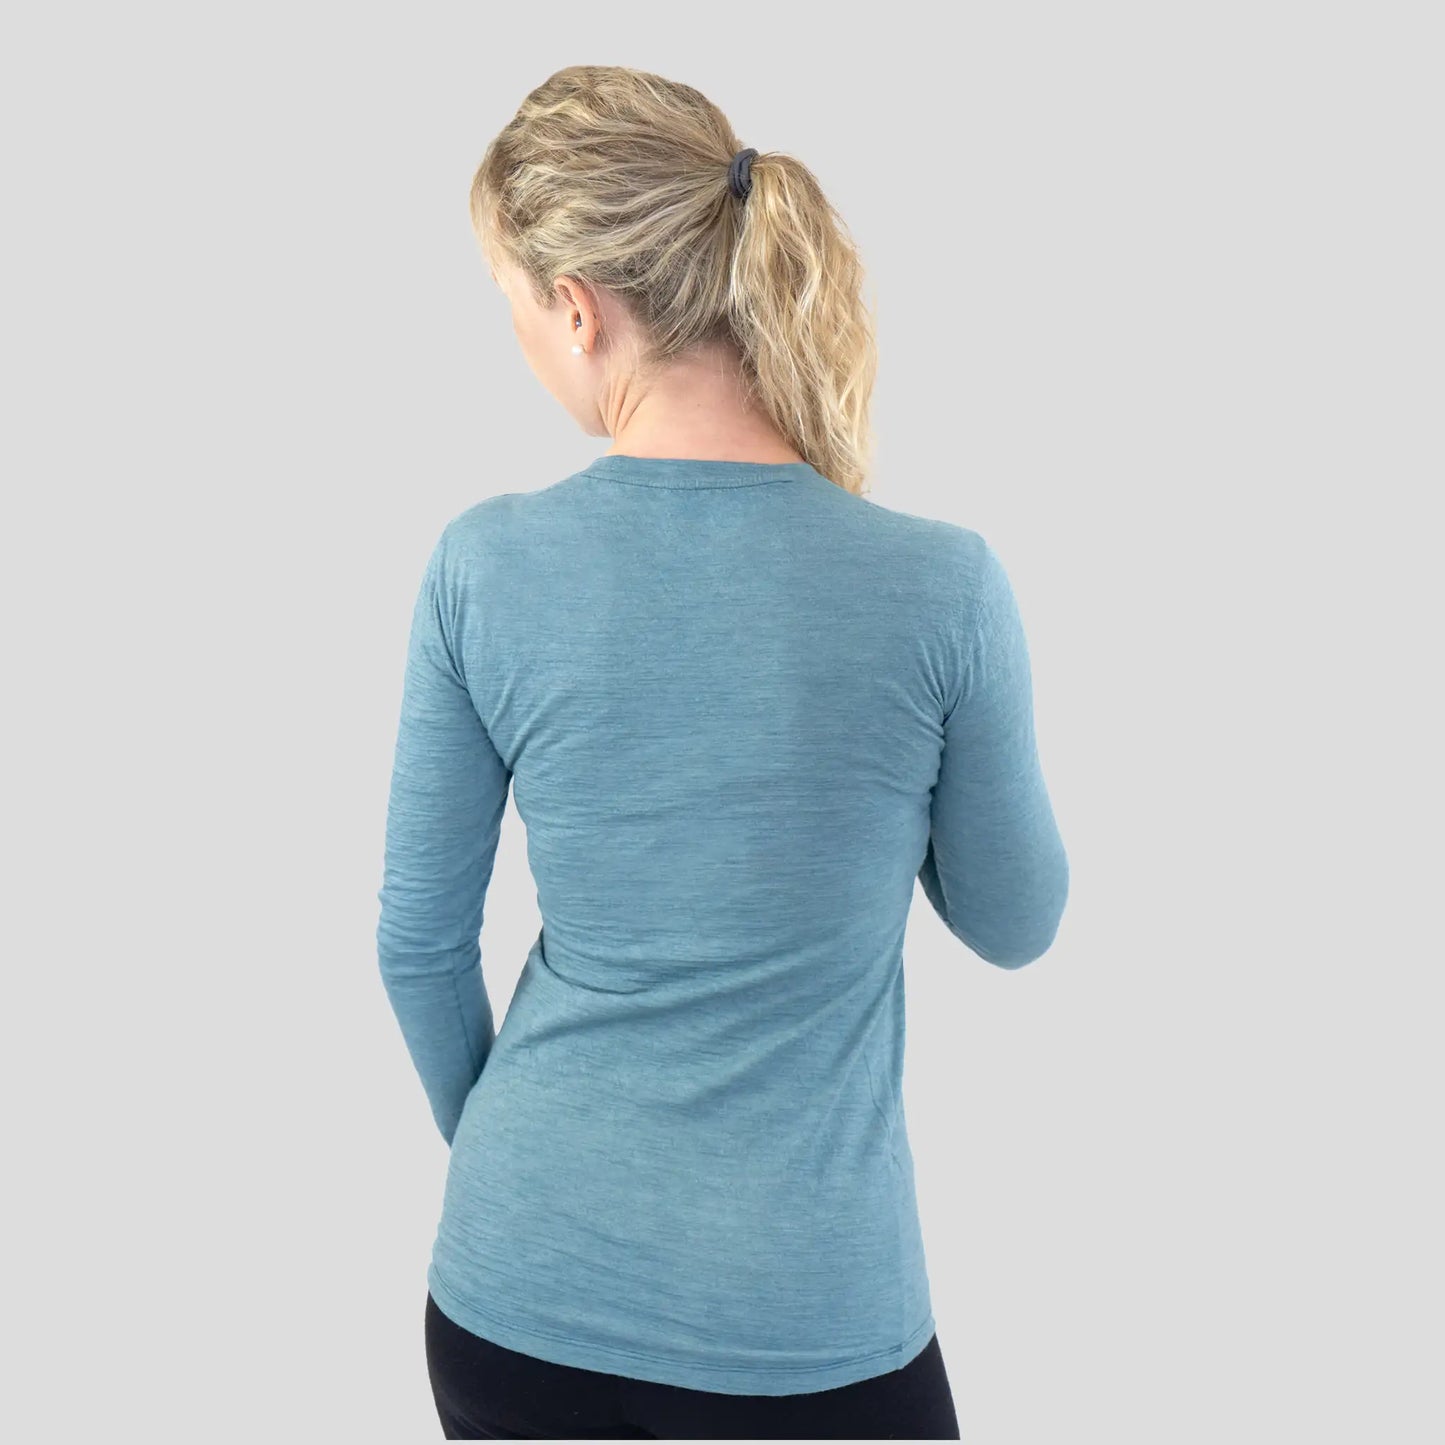 Women's Alpaca Wool Long Sleeve Base Layer: 160 Ultralight color Natural Turquoise